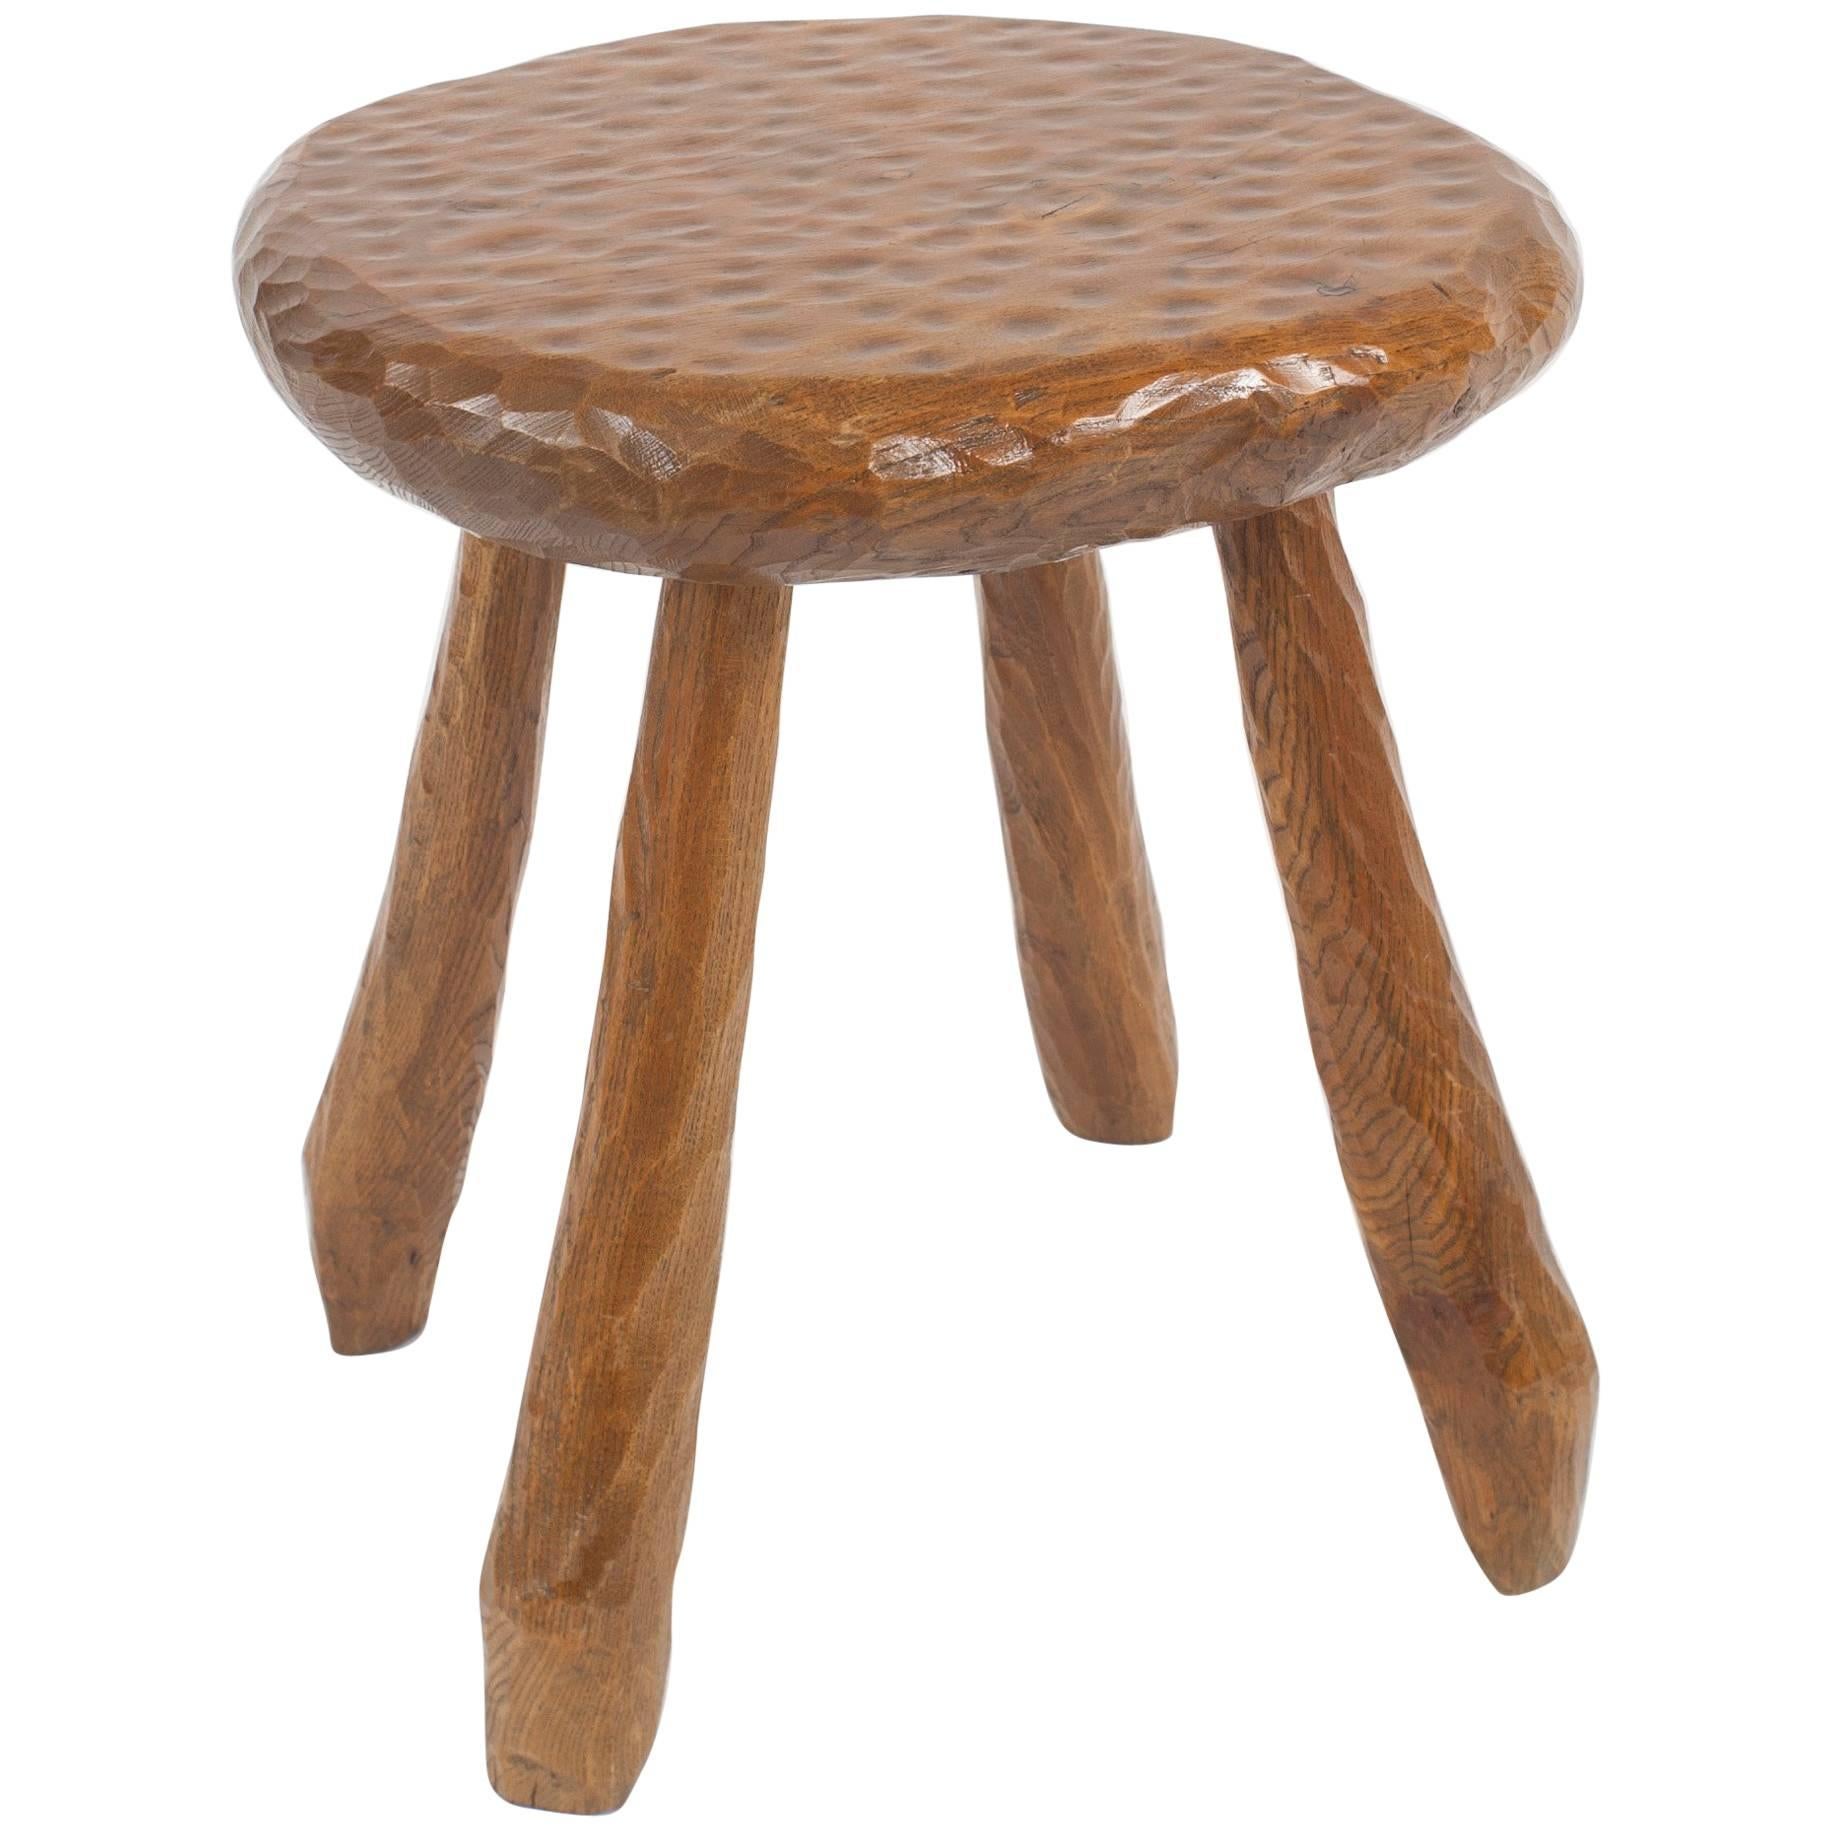 French Rustic Adirondack Style Chipped Pine Stool